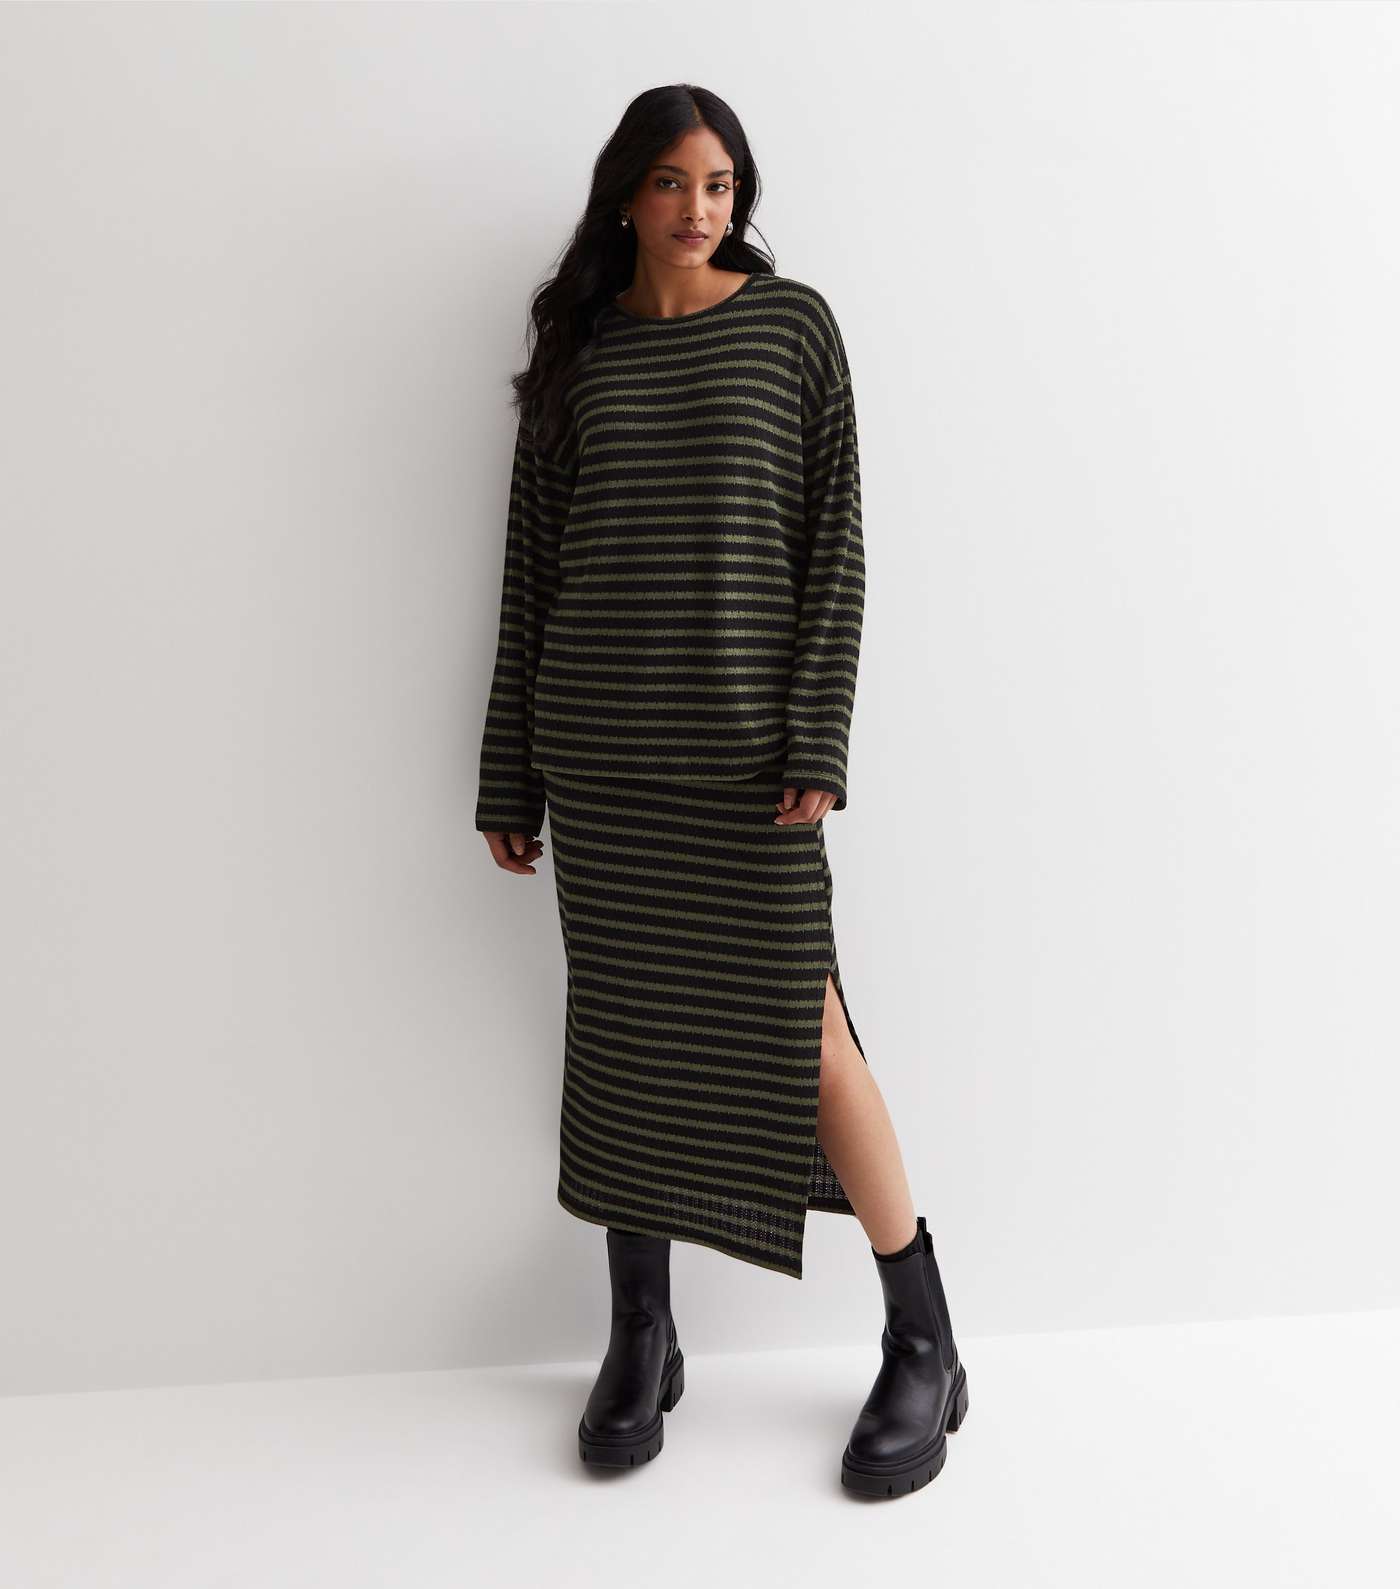 Green Stripe Textured Knit Long Sleeve Top Image 3